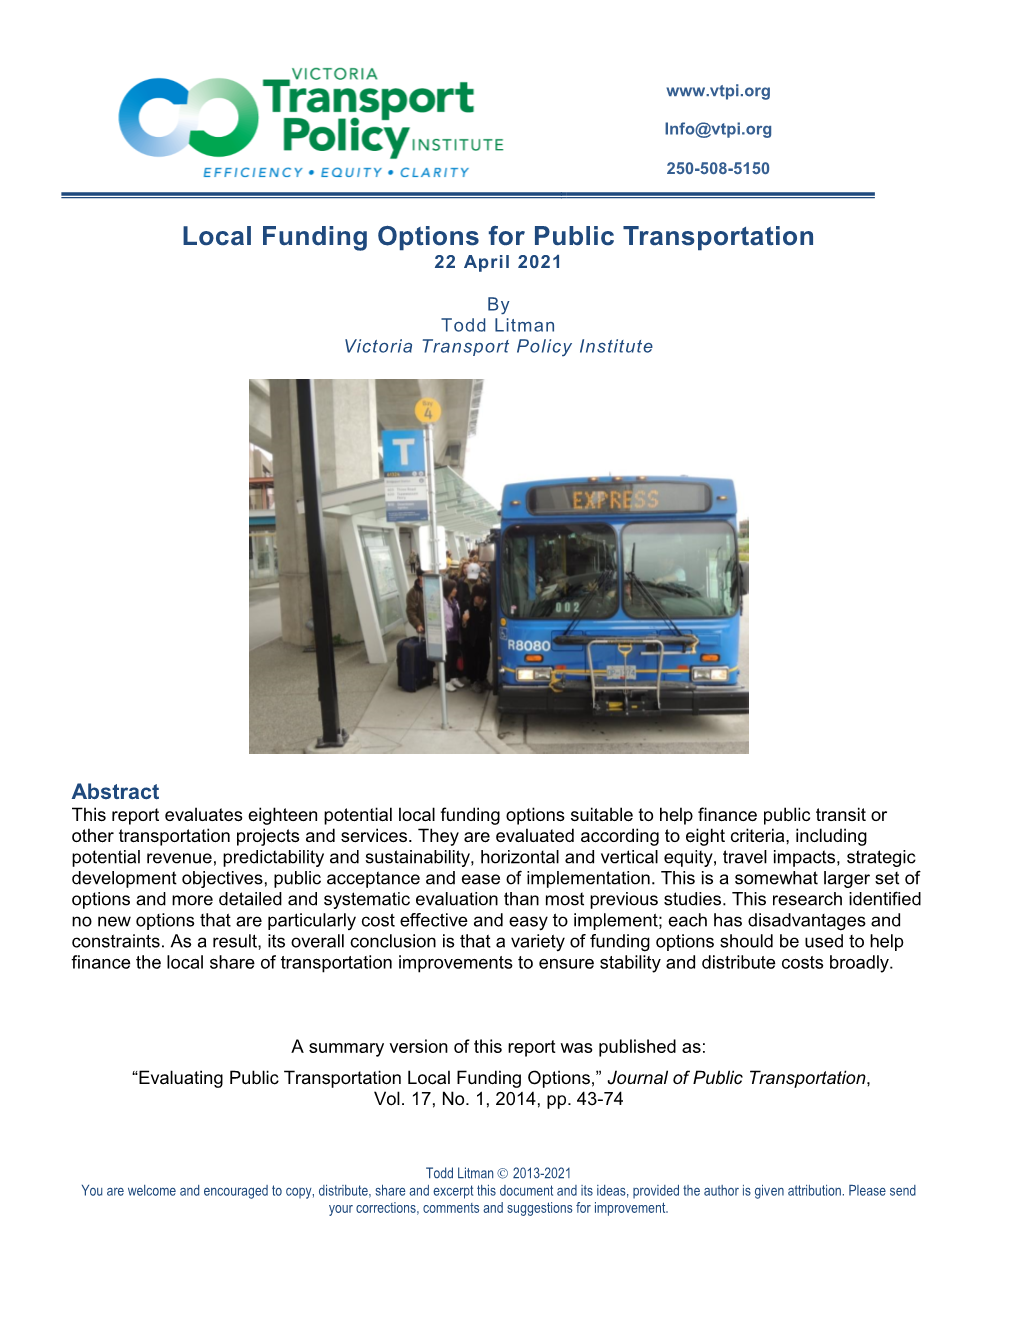 Local Funding Options for Public Transportation 22 April 2021